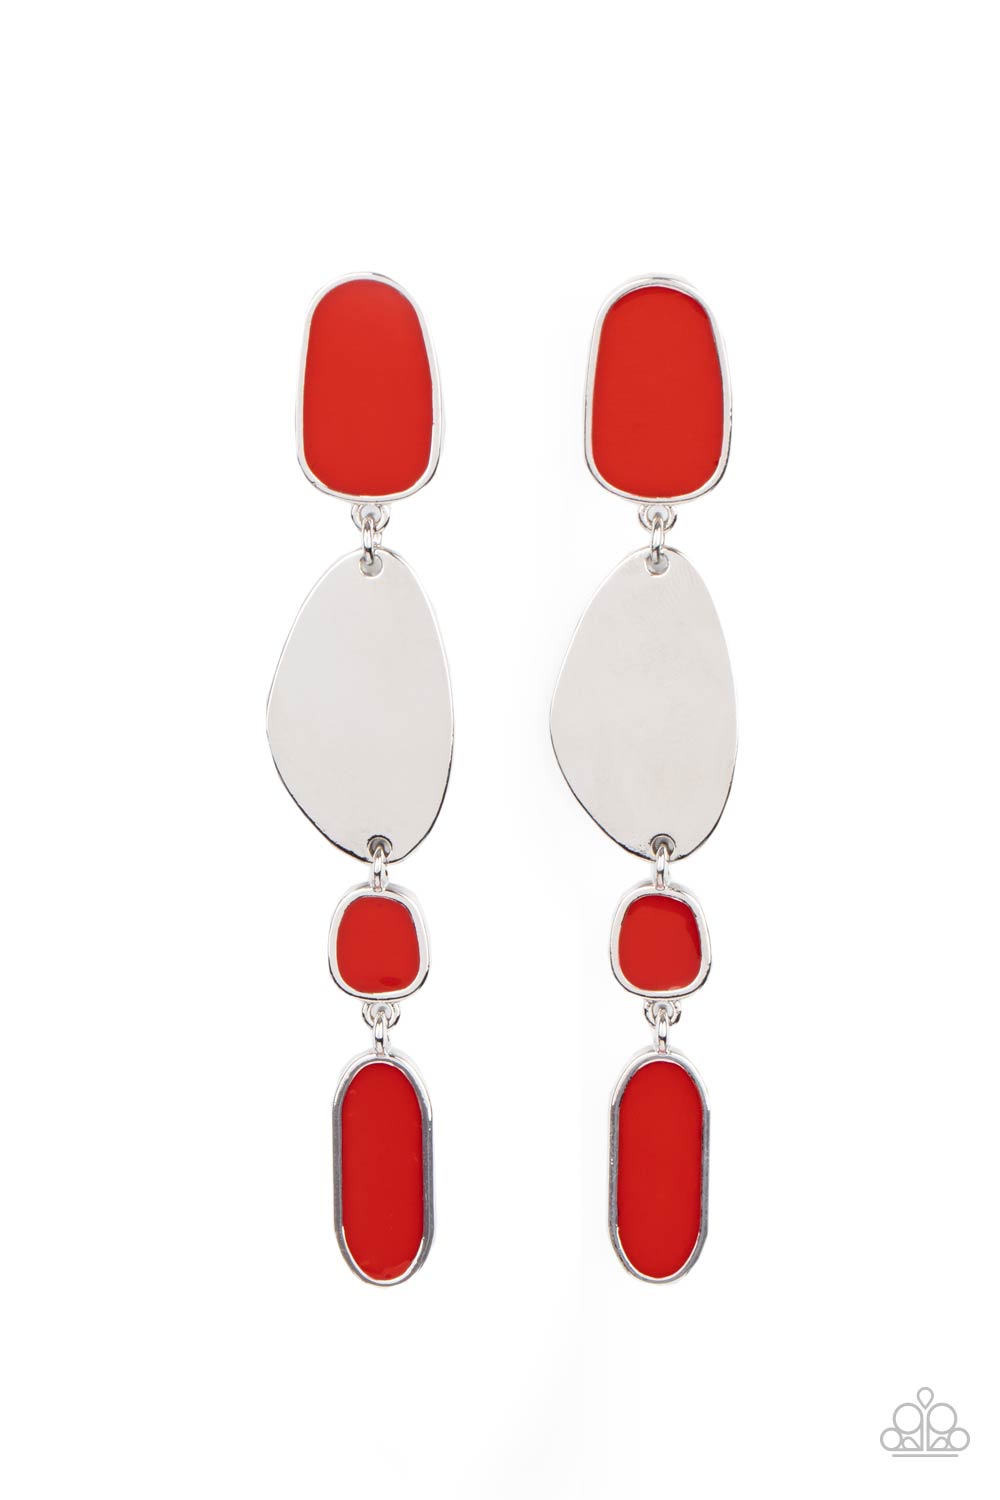 Paparazzi Accessories - Deco by Design - Red Earrings - Alies Bling Bar